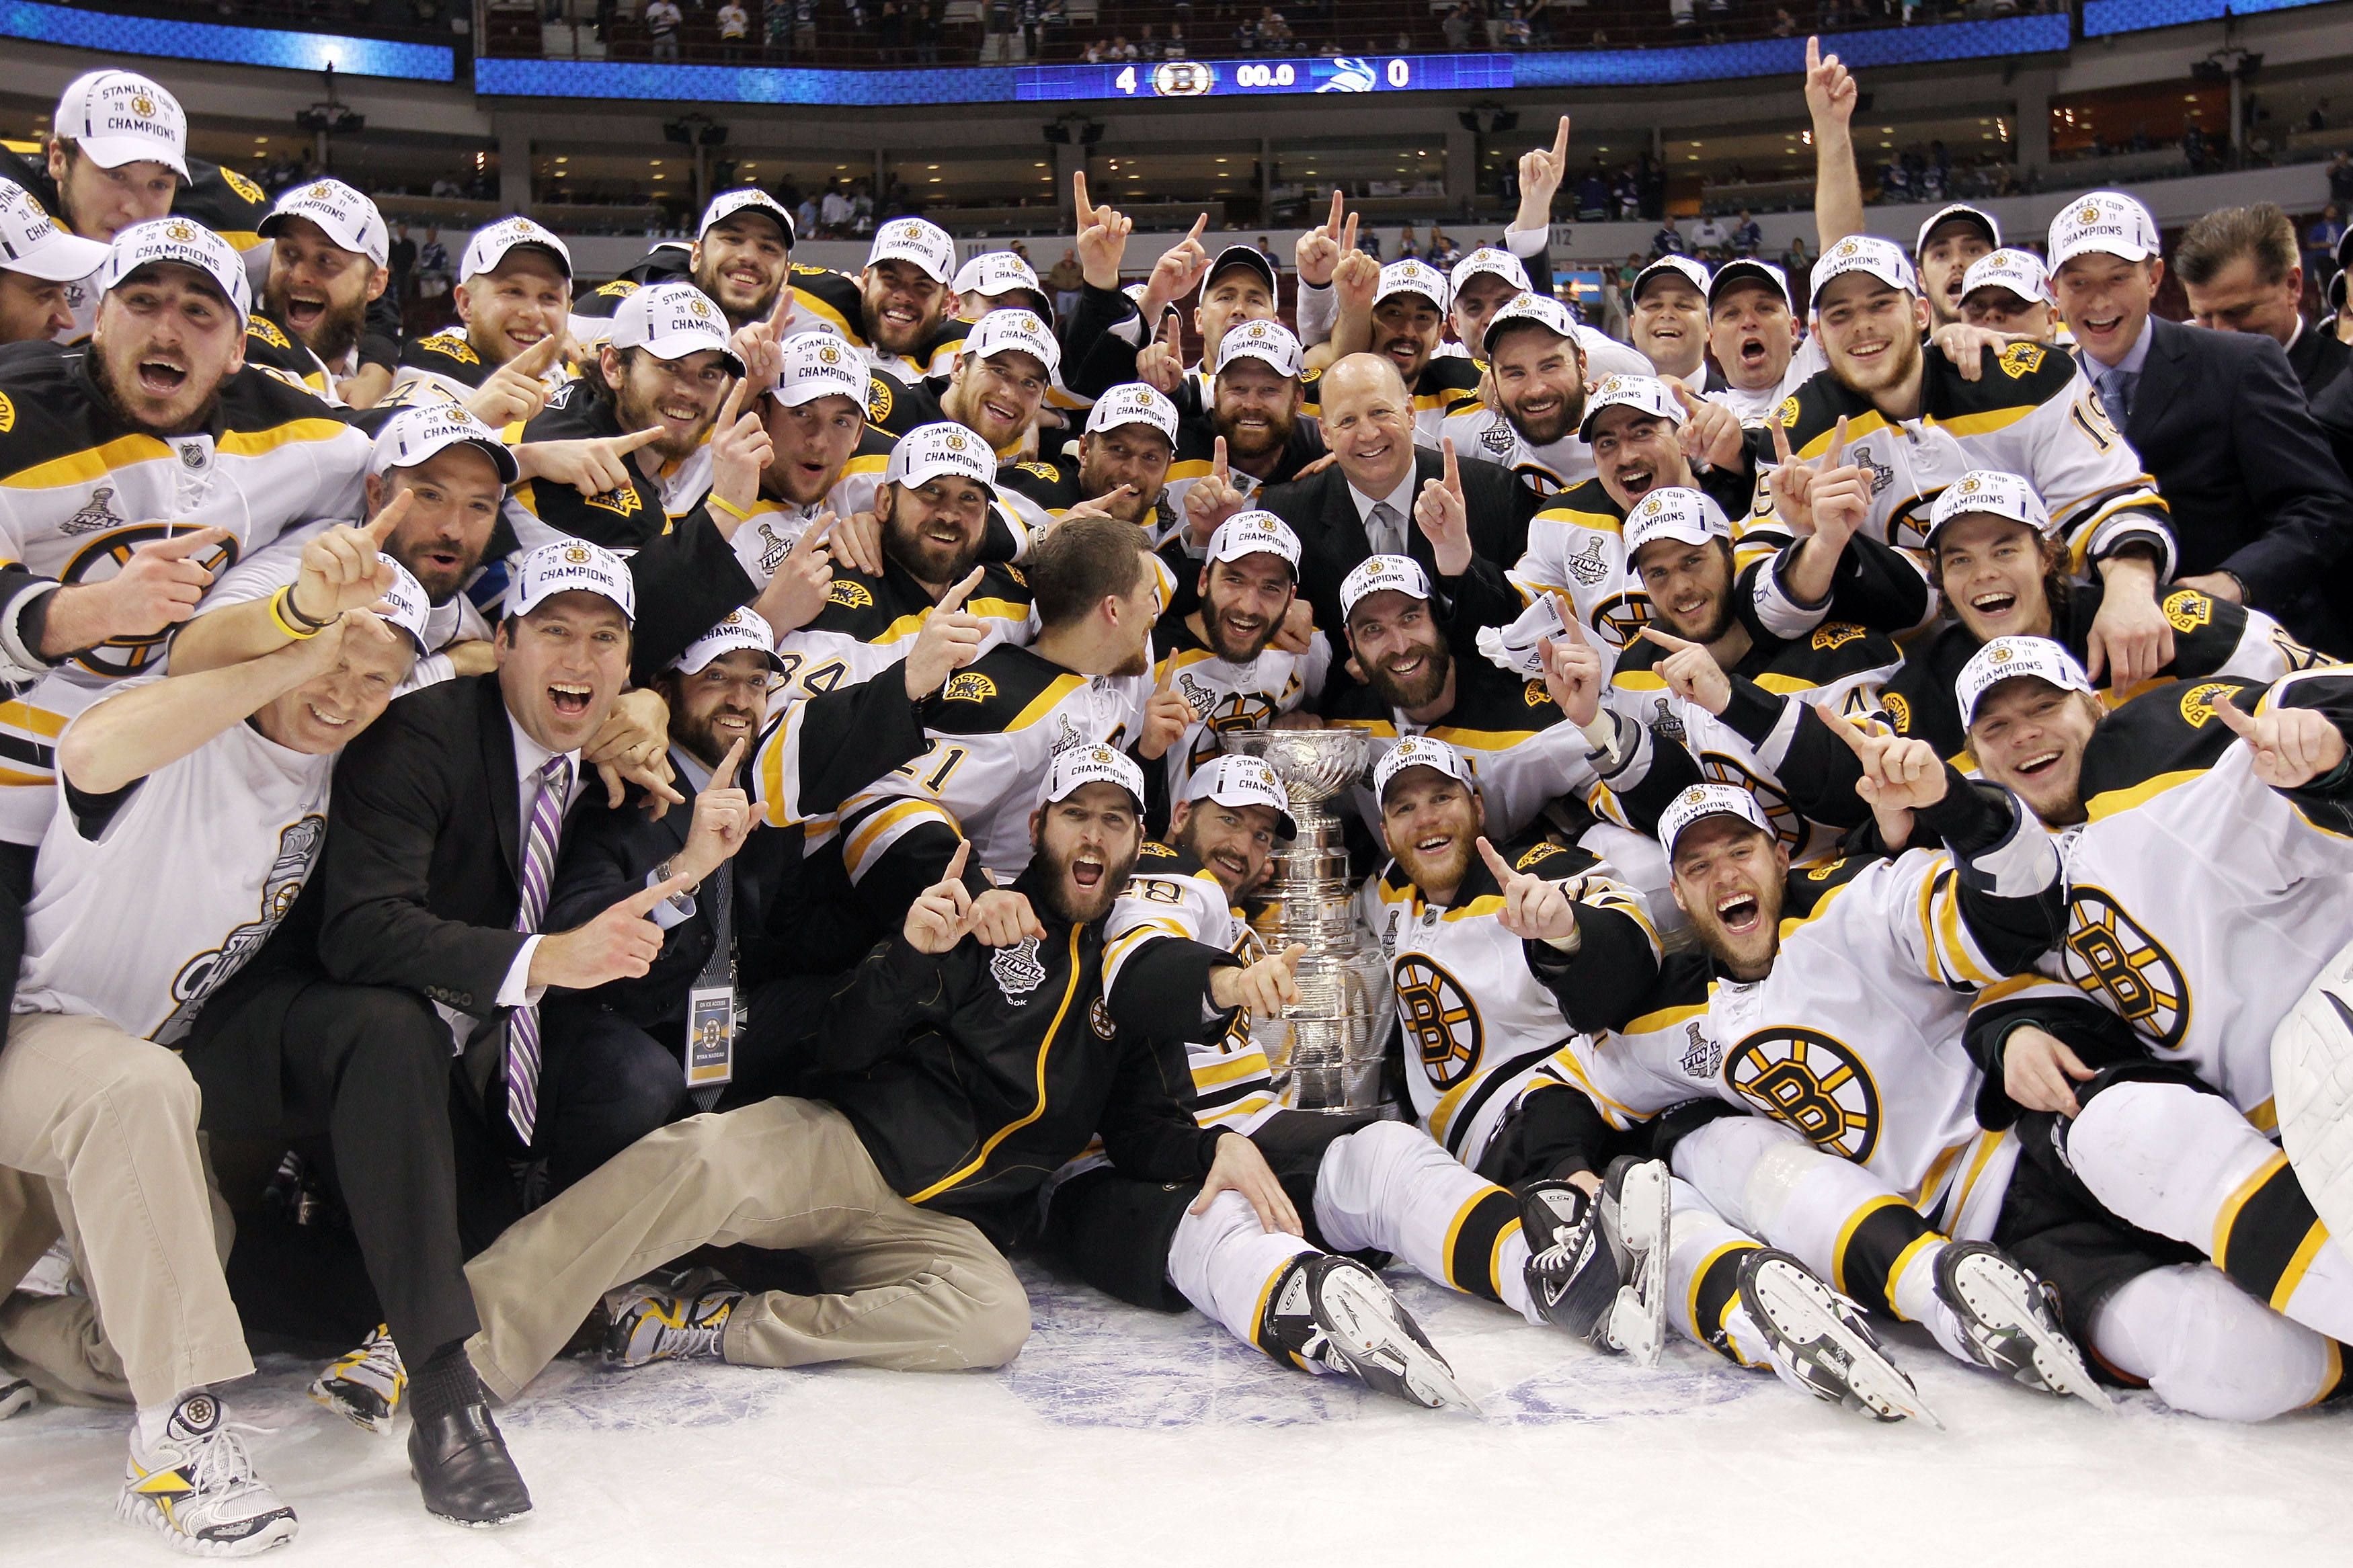 VANCOUVER, BC - JUNE 15:  The Boston Bruins pose with the Stanley Cup after defeating the Vancouver Canucks in Game Seven of the 2011 NHL Stanley Cup Final at Rogers Arena on June 15, 2011 in Vancouver, British Columbia, Canada. The Boston Bruins defeated